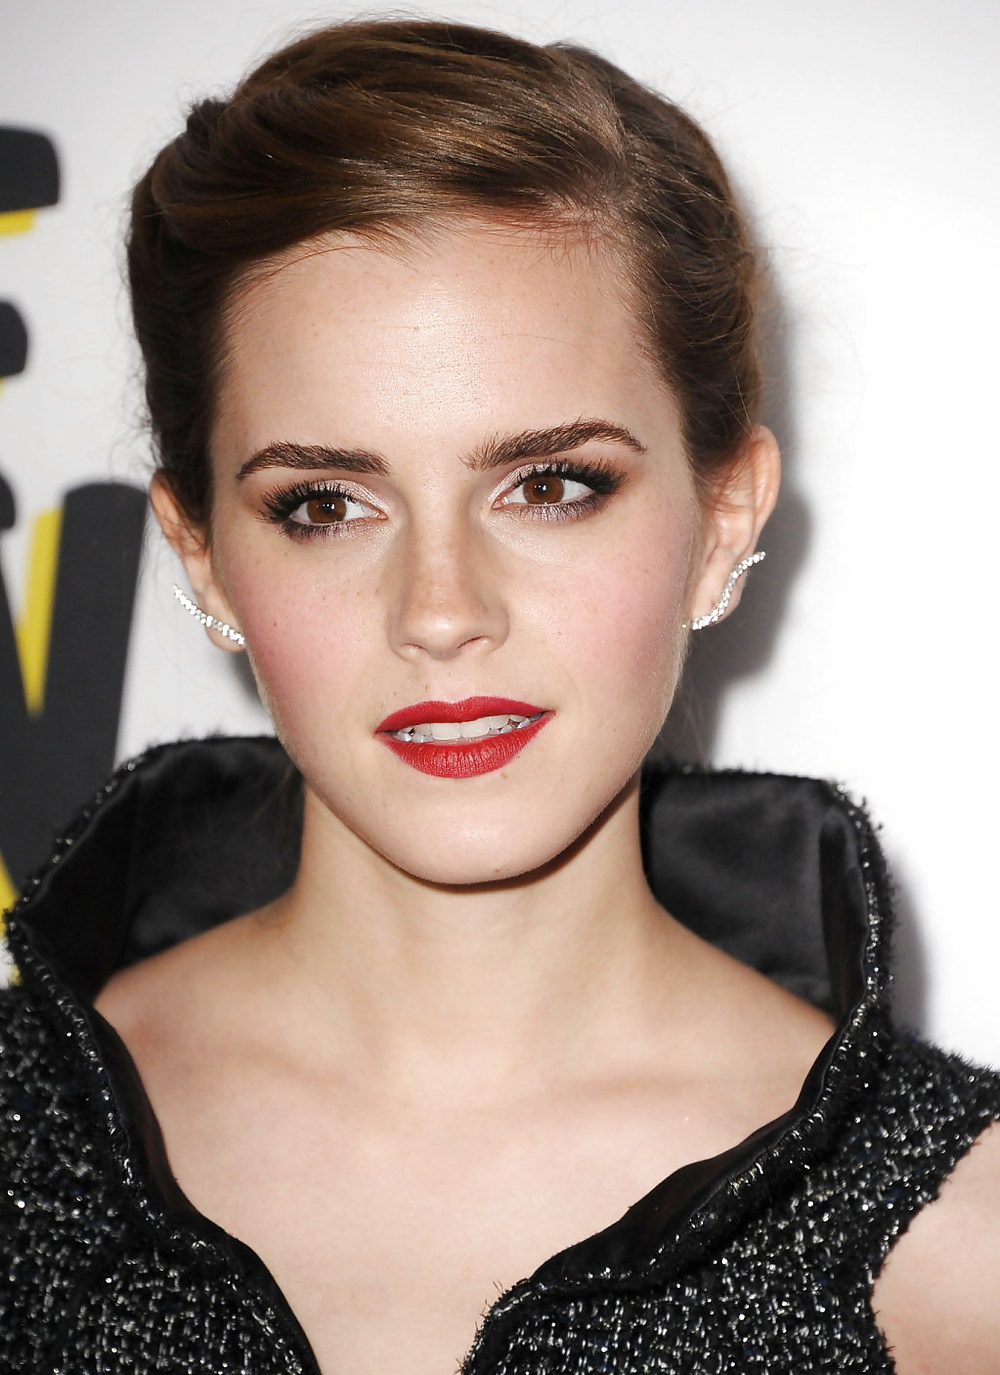 Most beautiful emma watson pic and face ever! #17724399